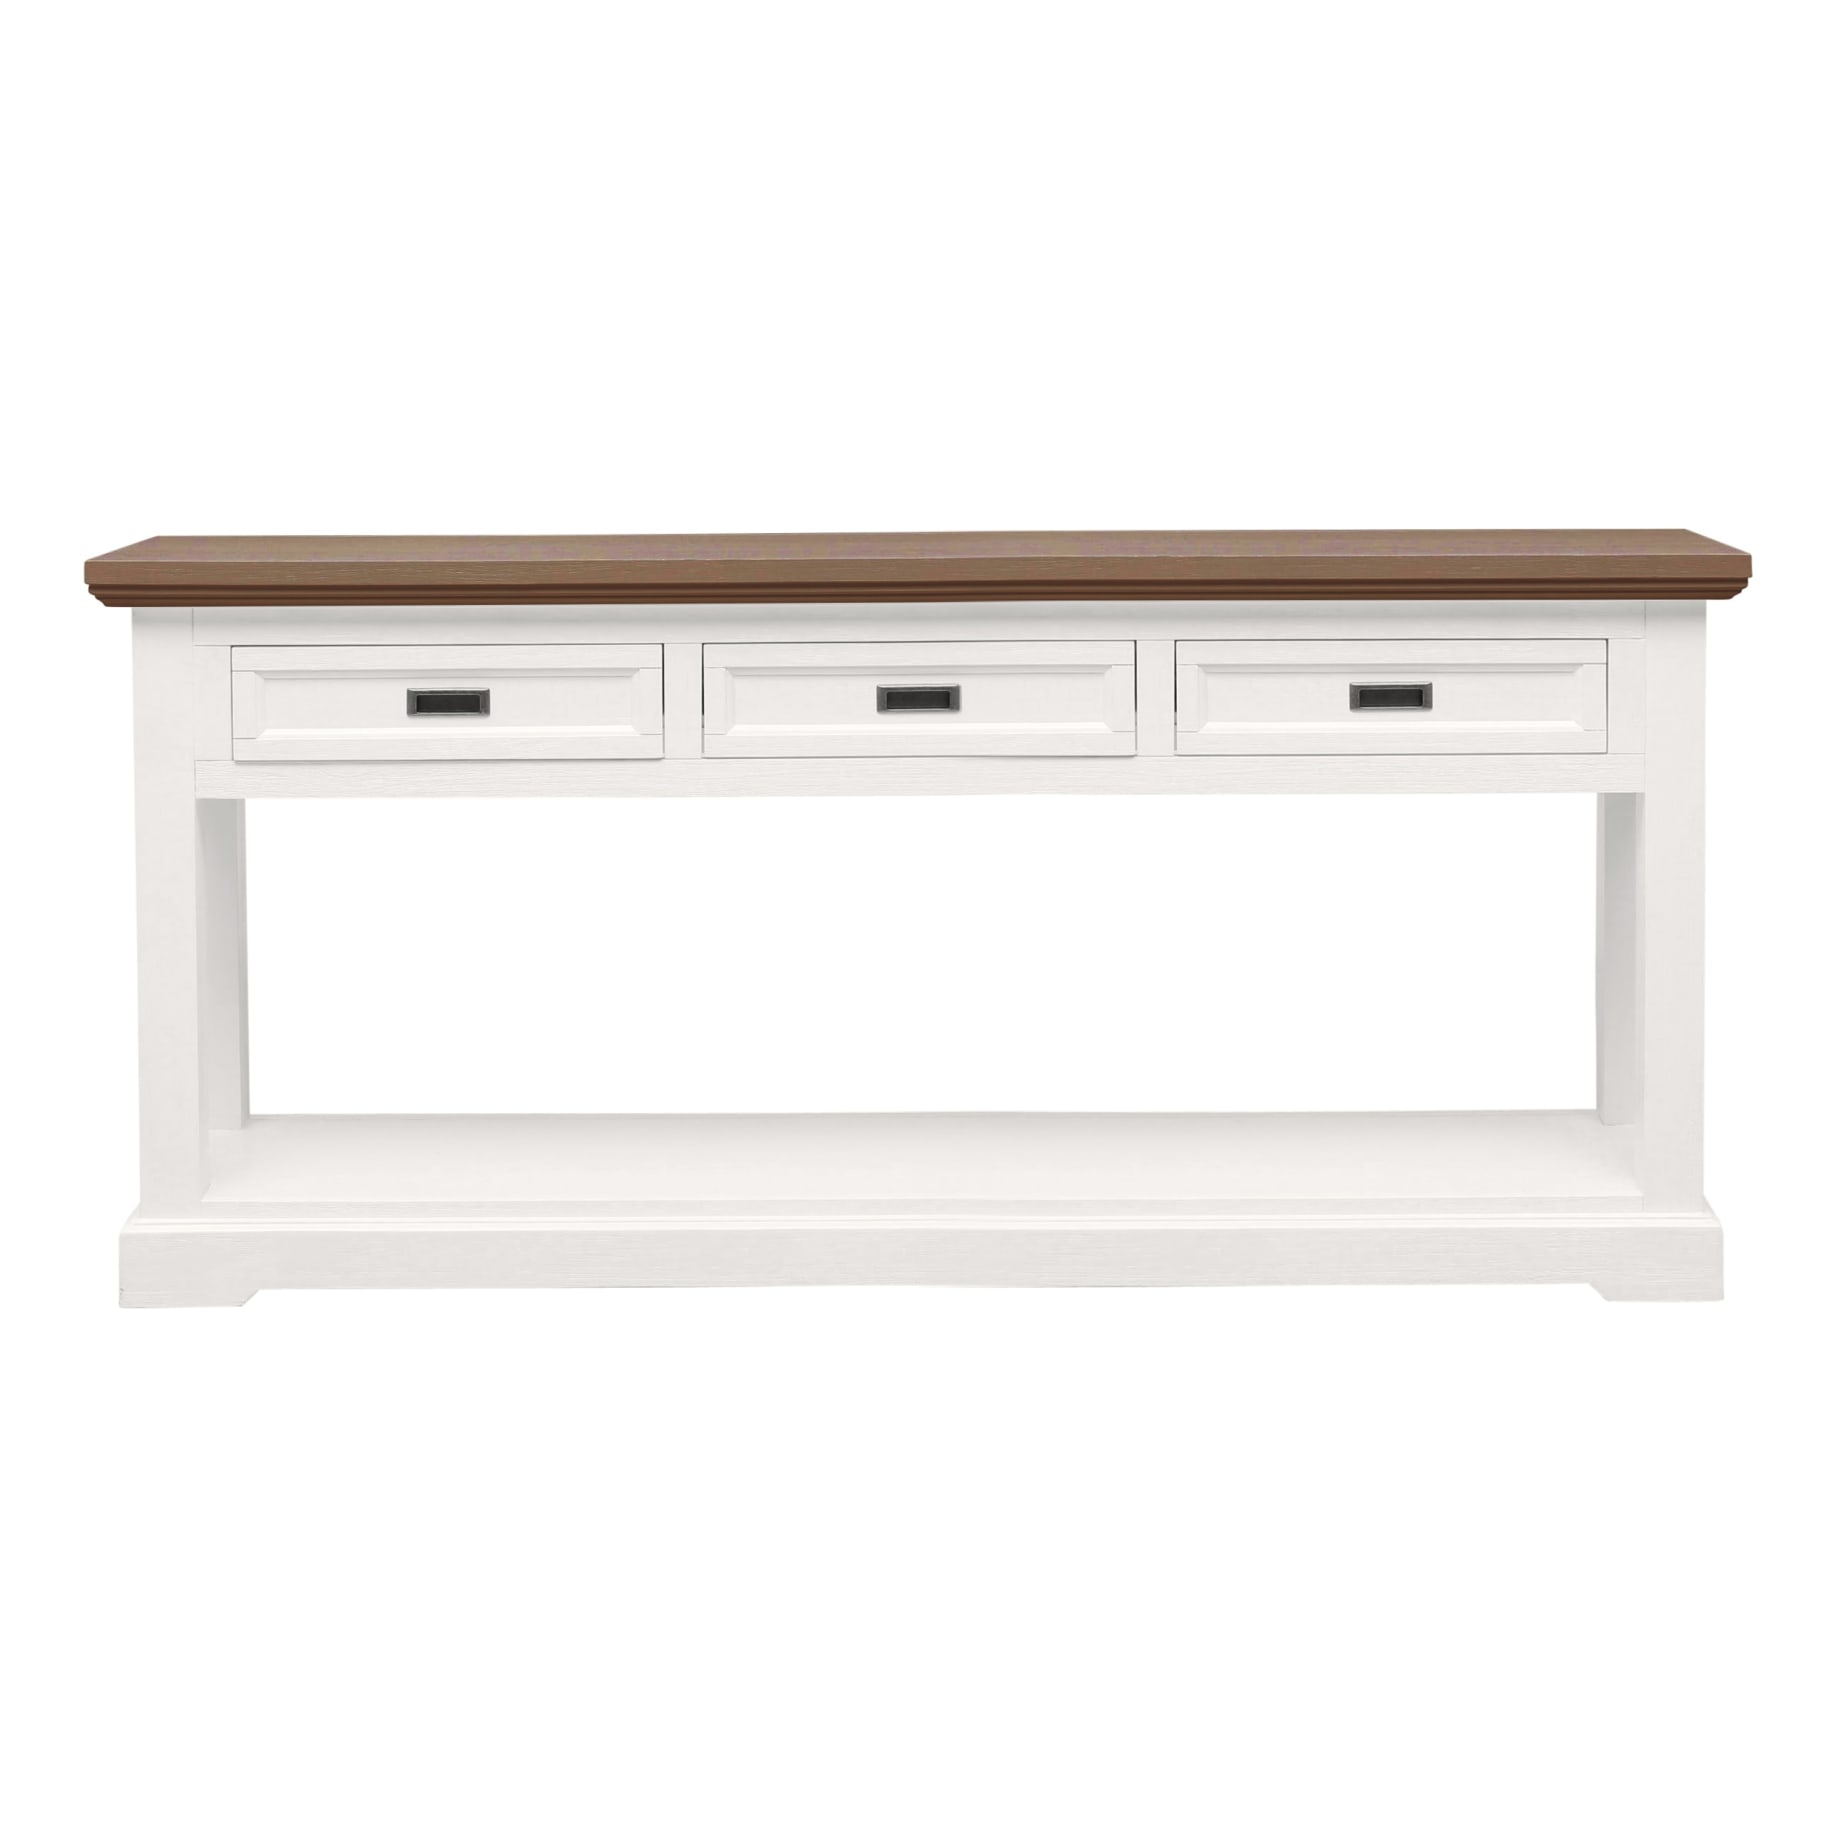 Hamptons Console Table 175cm Drawer in Acacia Two Tone